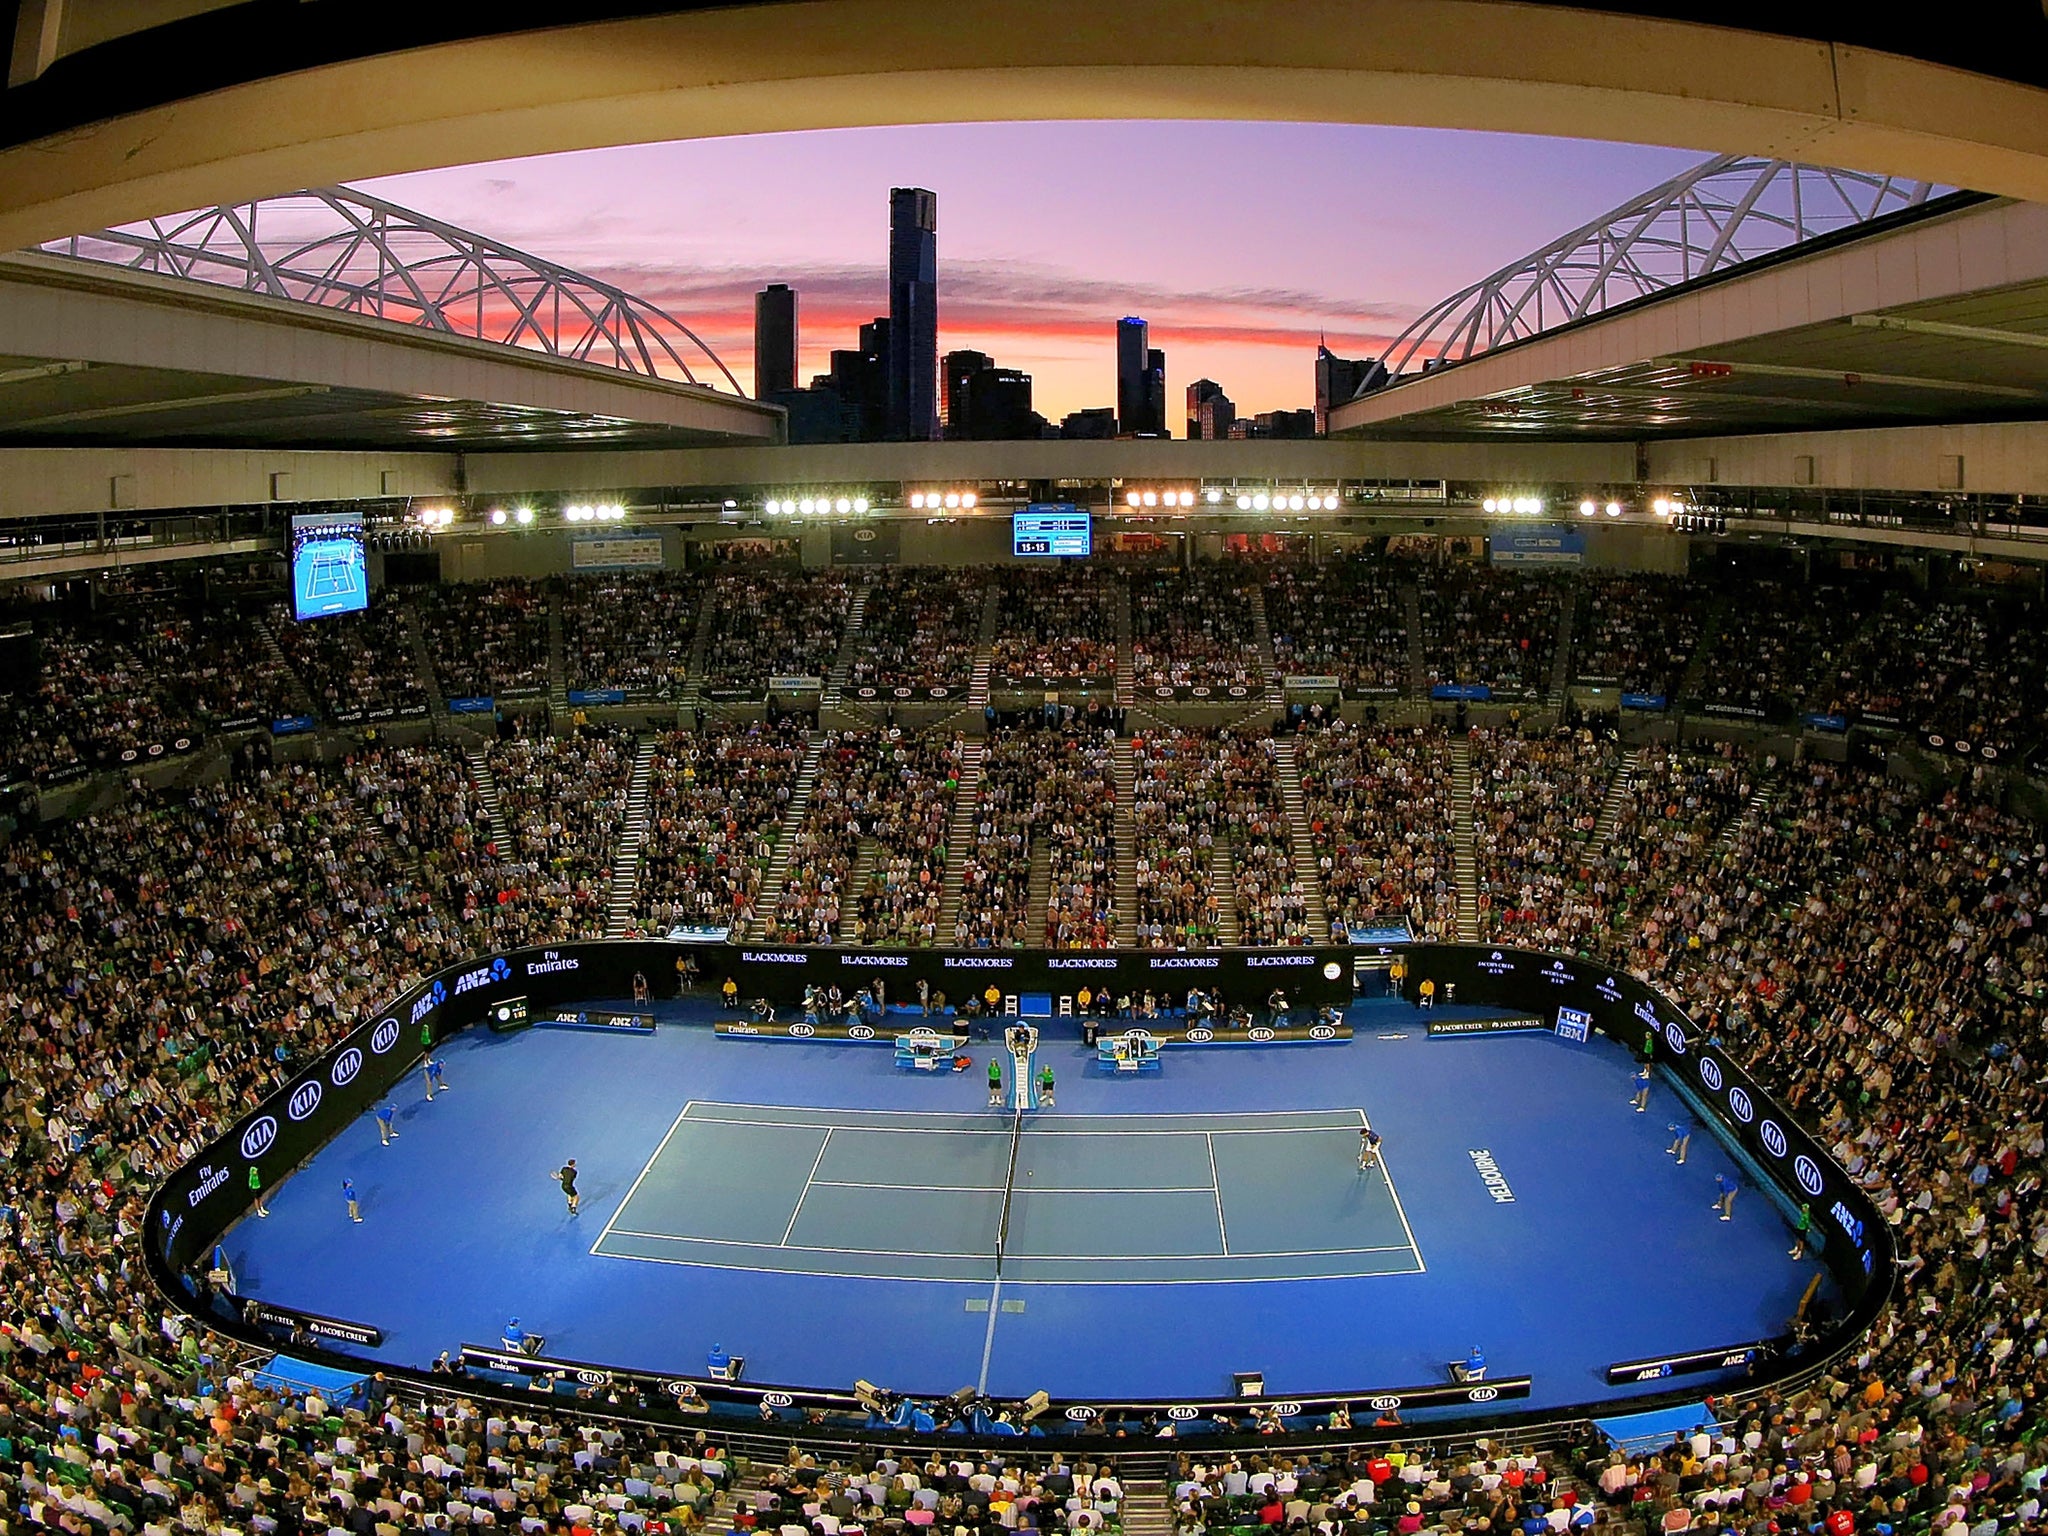 Andy Murray (left) and Novak Djokovic battle it out at the Rod Laver Arena in the final of the Australian Open